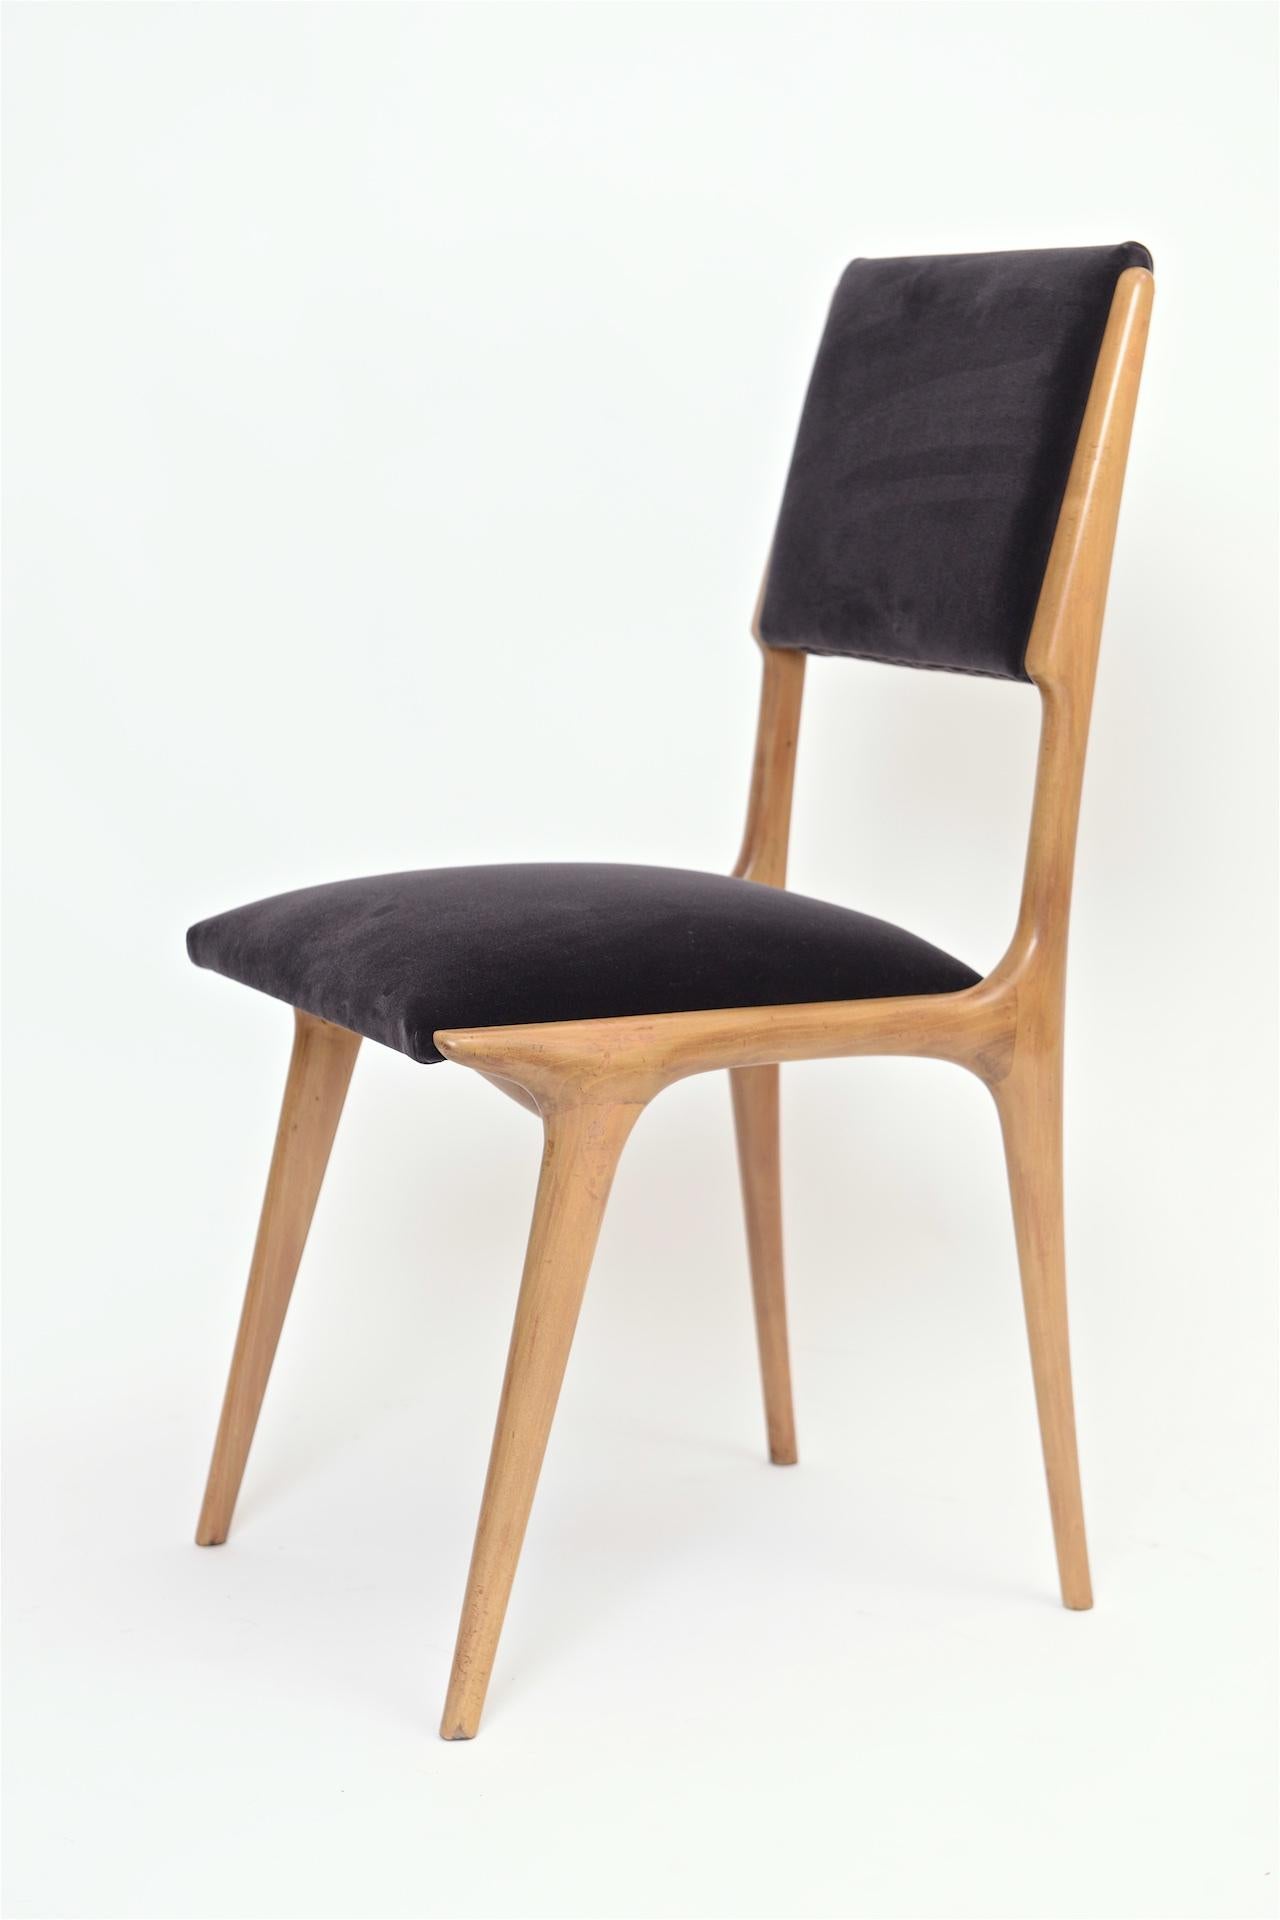 Early Carlo de Carli dining chairs in beech.

Restored and re upholstered in slate velvet.